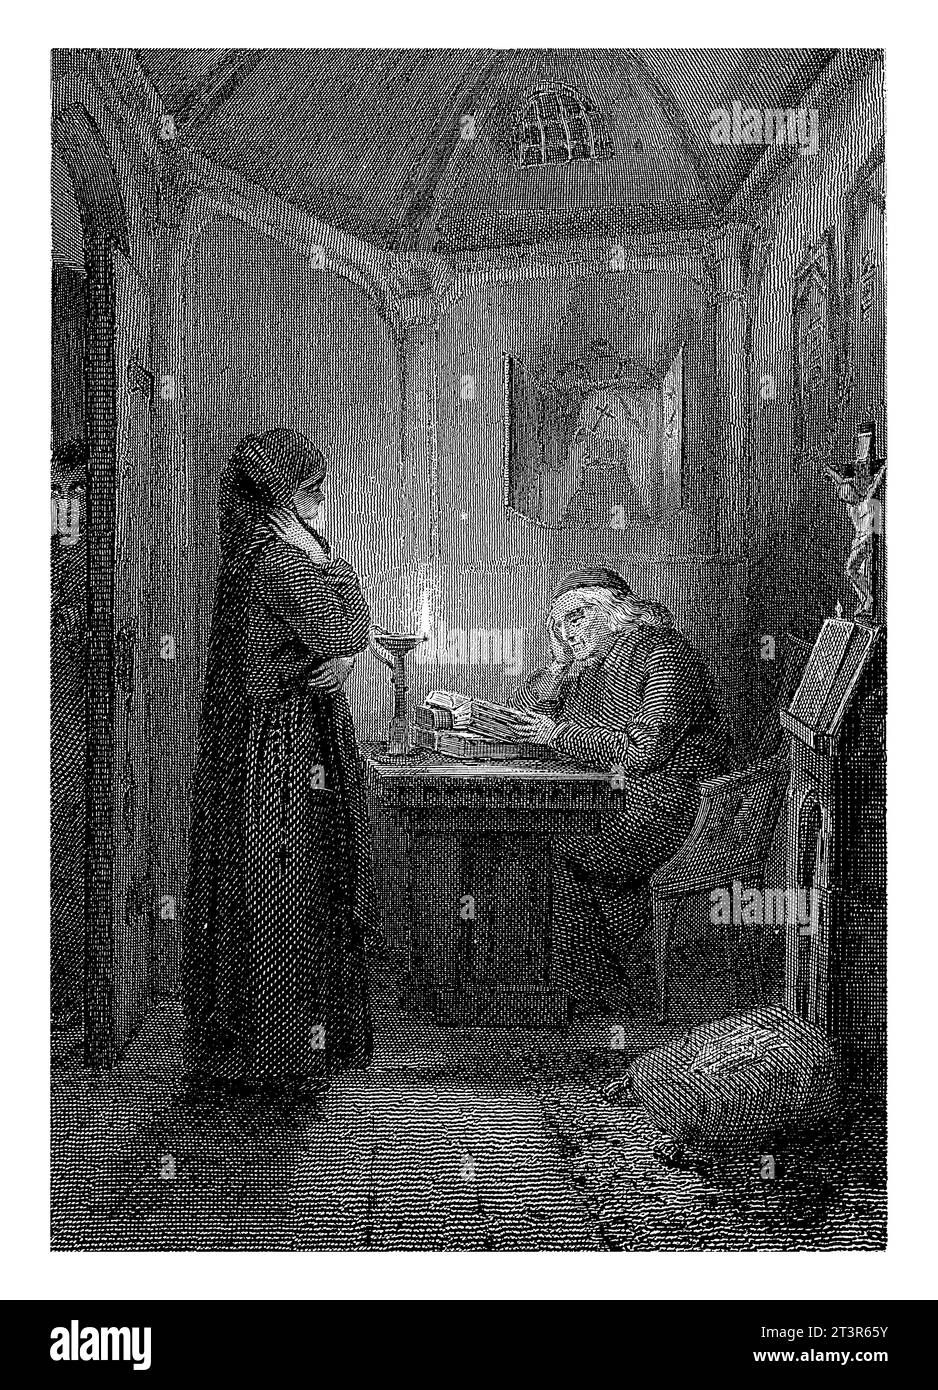 Cleric Reading by Candlelight, Willem Frederik Wehmeyer, after Charles Rochussen, 1842 - 1873 A clergyman sits at a table with books, possibly in a sa Stock Photo